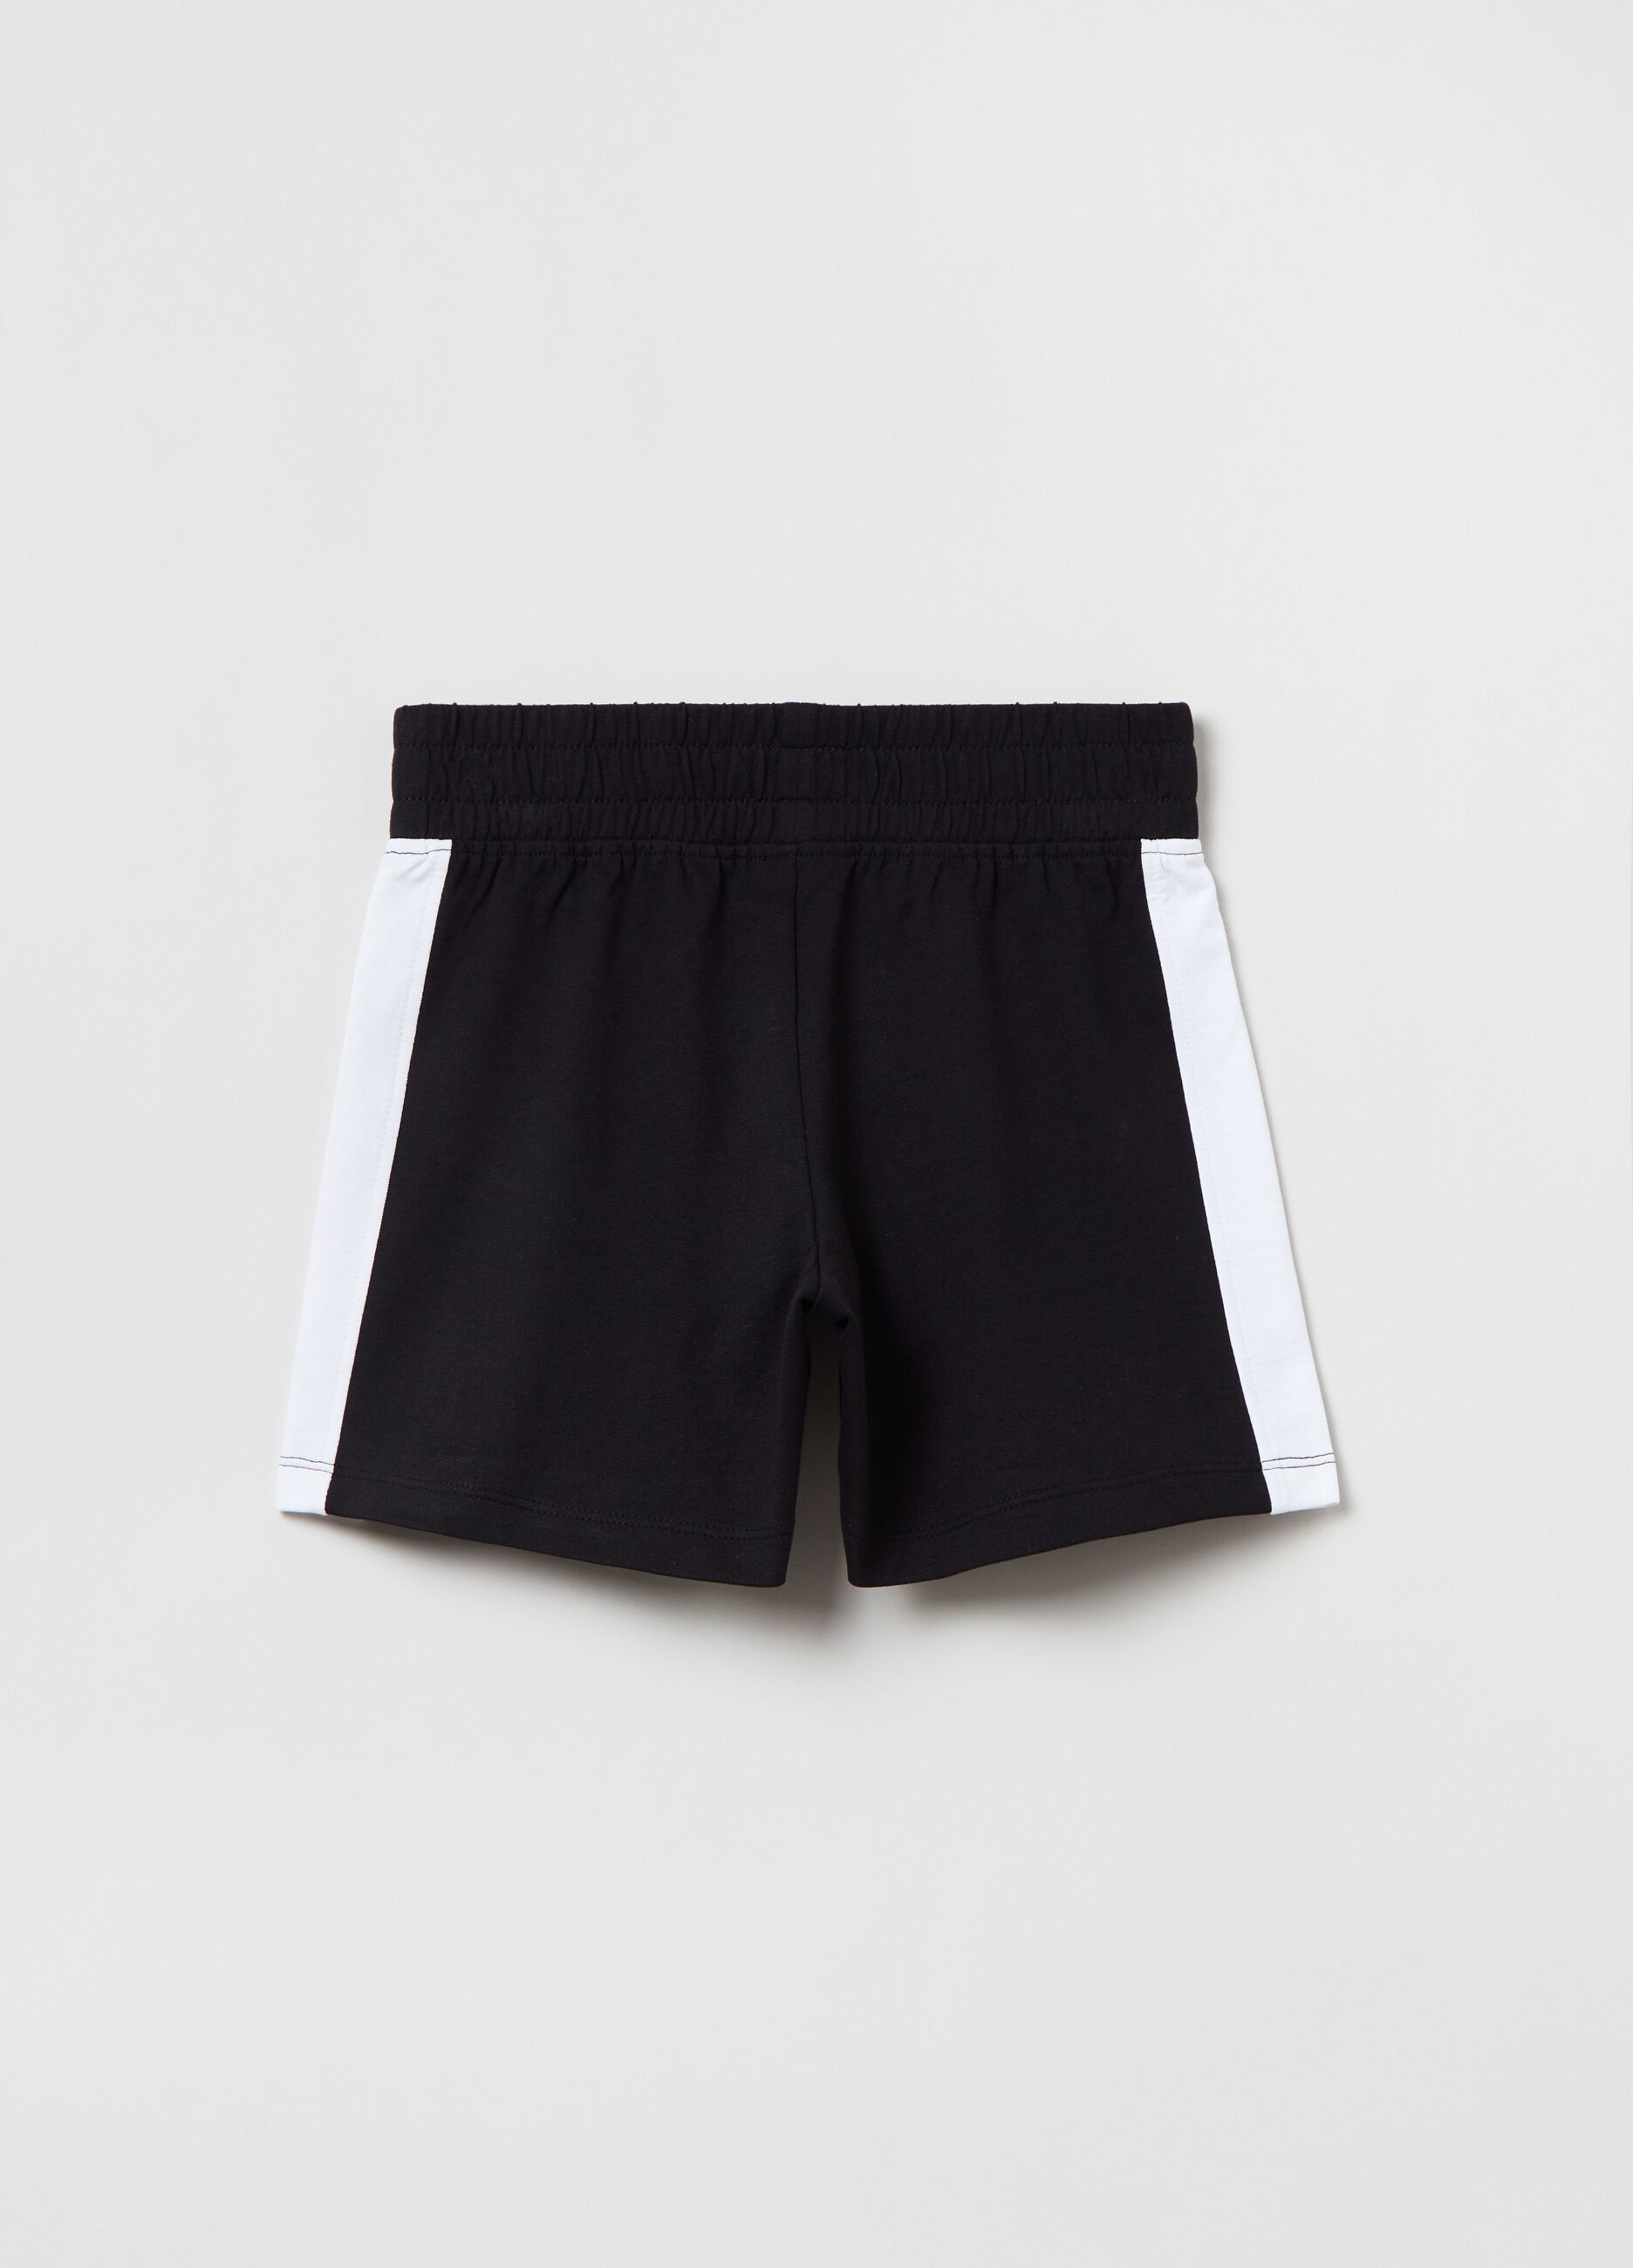 Two-tone shorts with lettering print